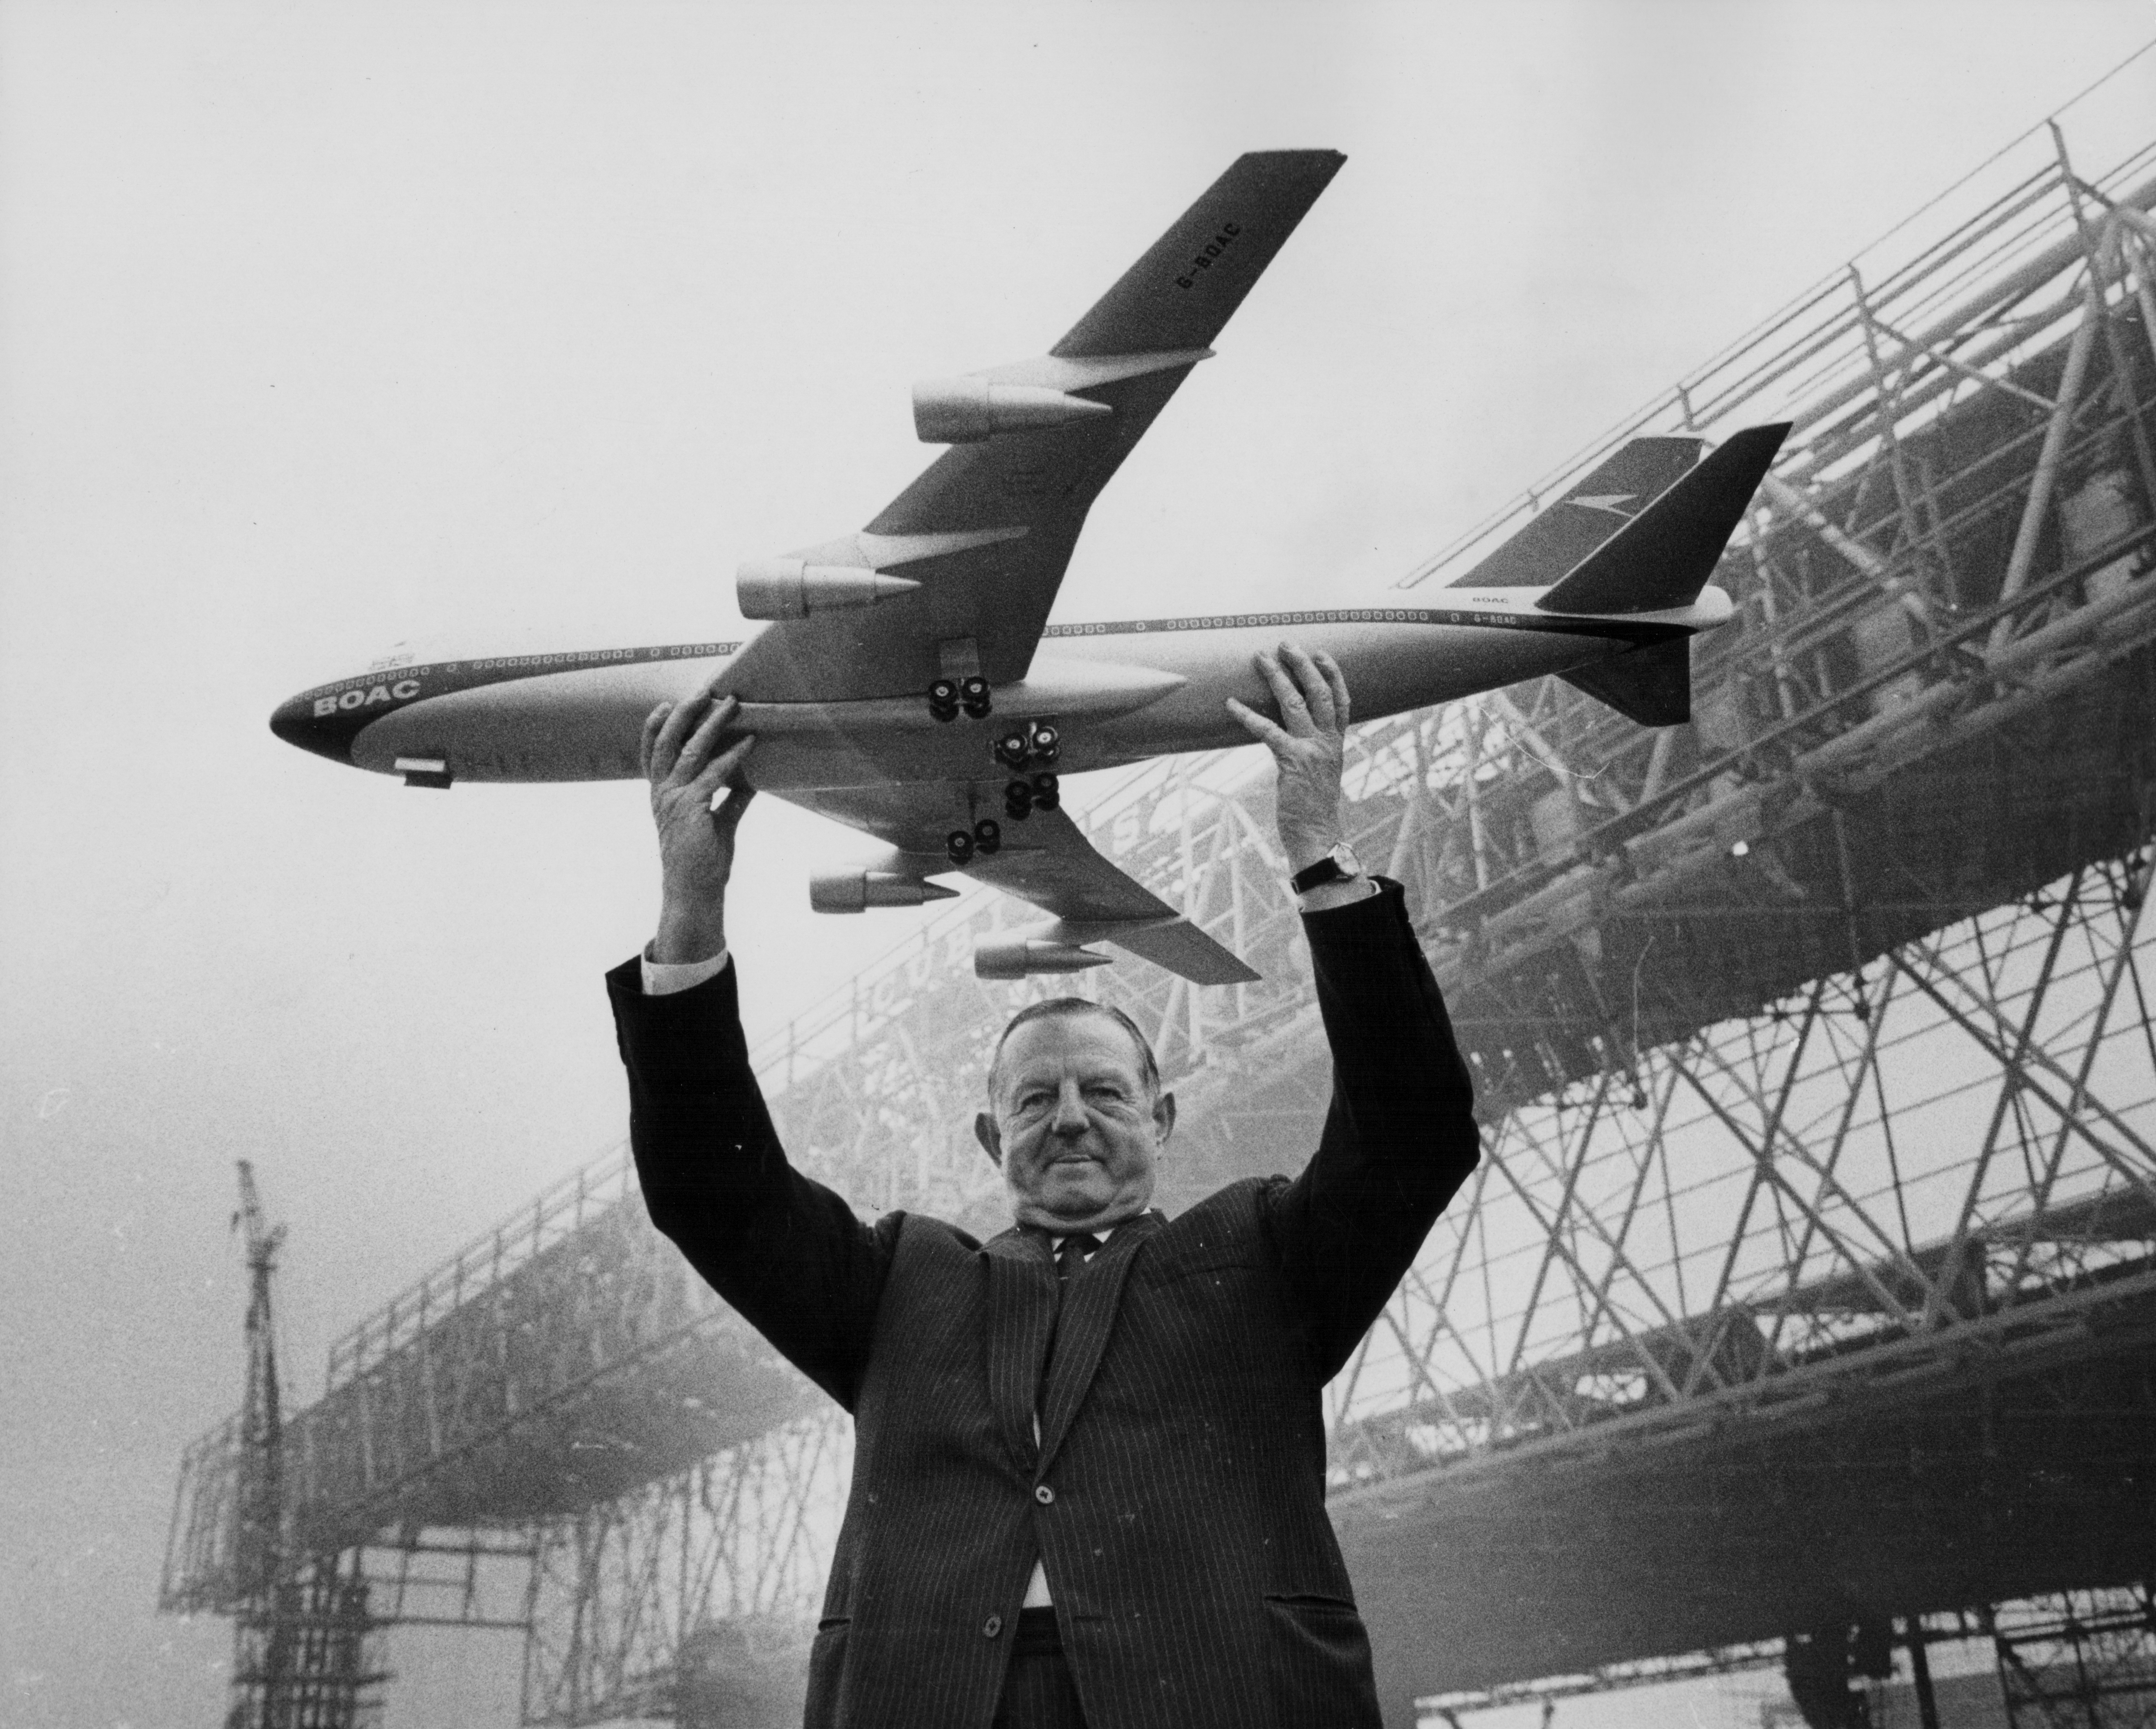 Keith Granville, Managing Director of BOAC, holding up a model of the Boeing 747 jet, with the new aircraft hangars under construction in the background, Heathrow Airport, London, March 17th 1969. Image: Jim Gray / Keystone / Getty Images